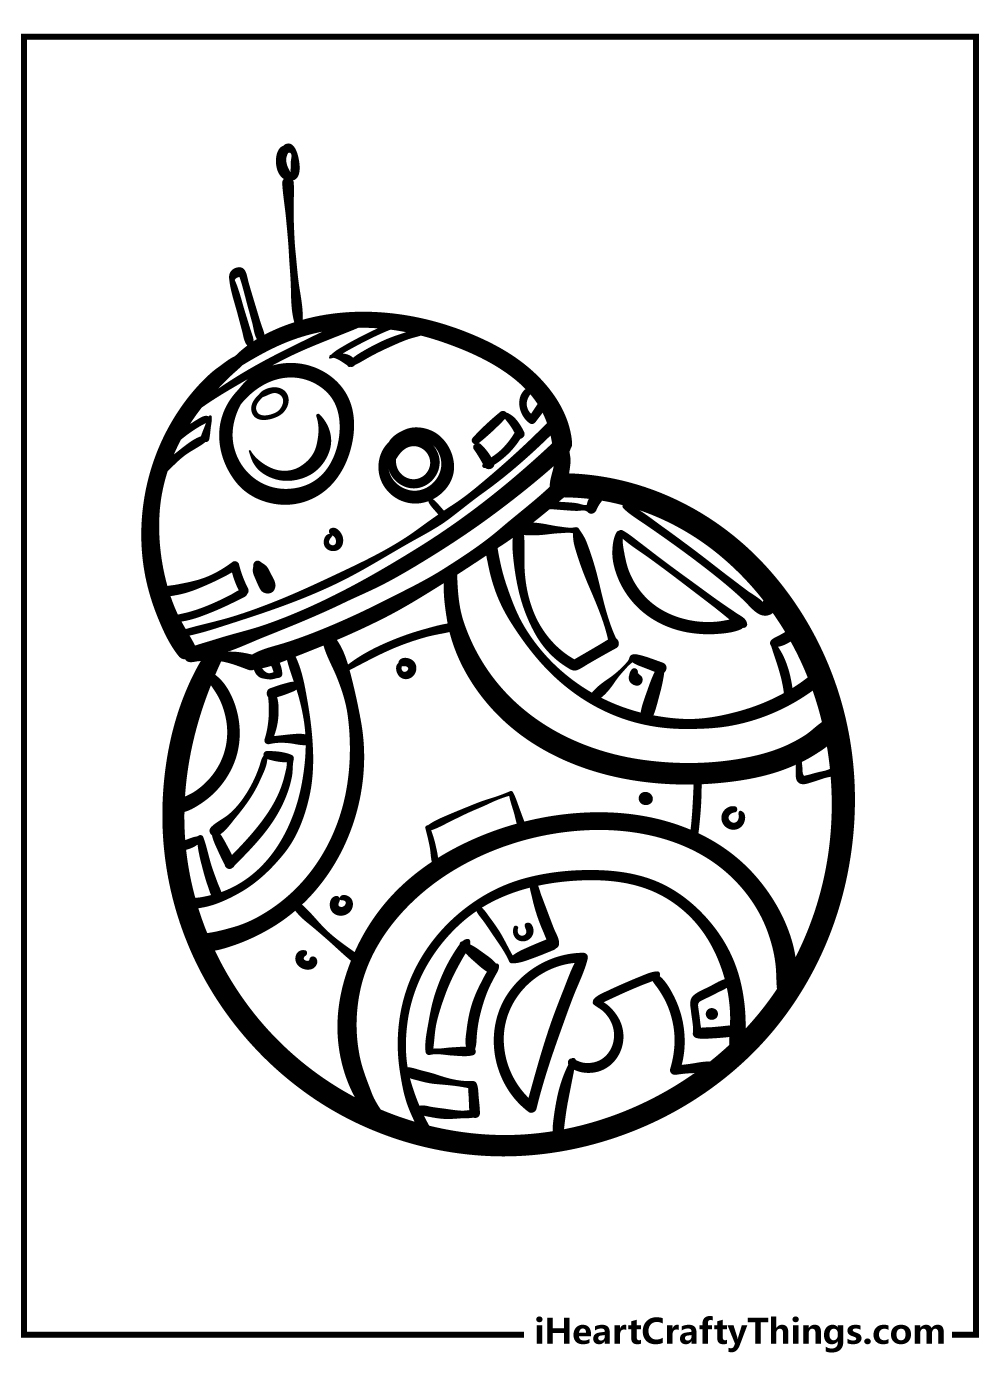 Star Wars Coloring Pages for preschoolers free printable